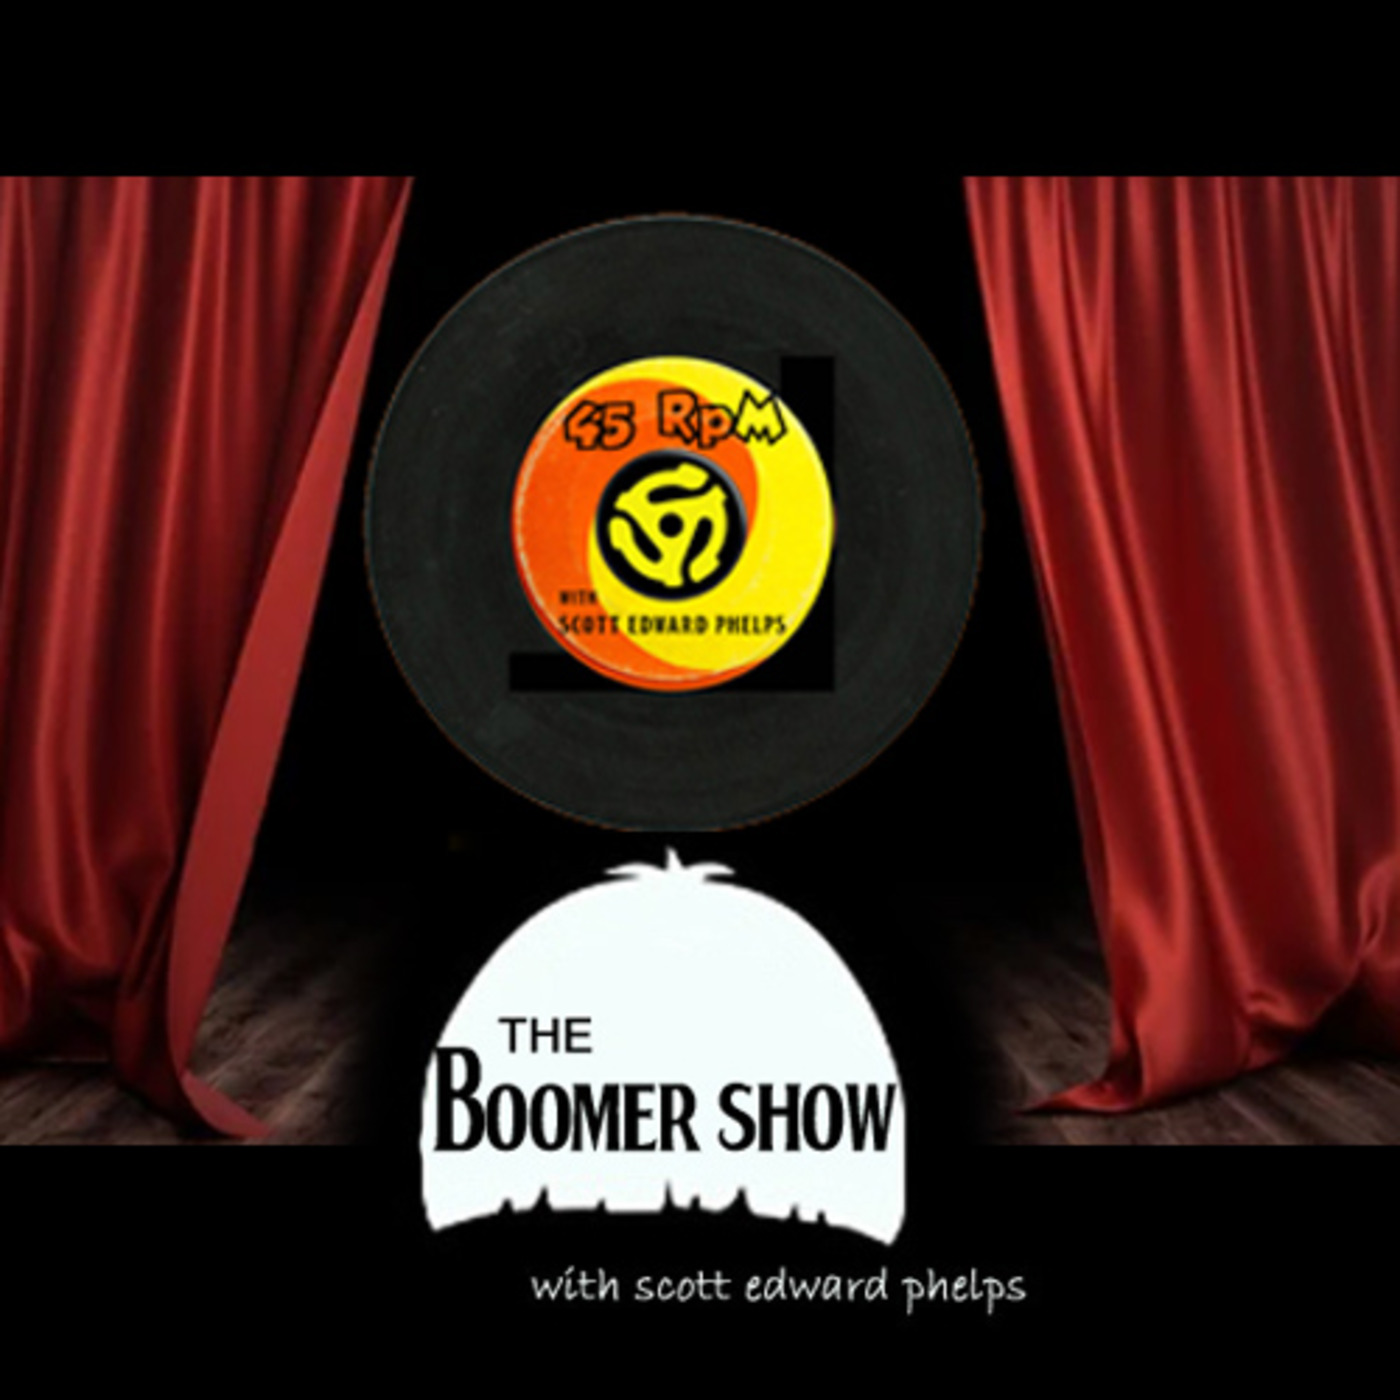 Episode 50: 45 RPM Presents THE BOOMER SHOW Episode Six